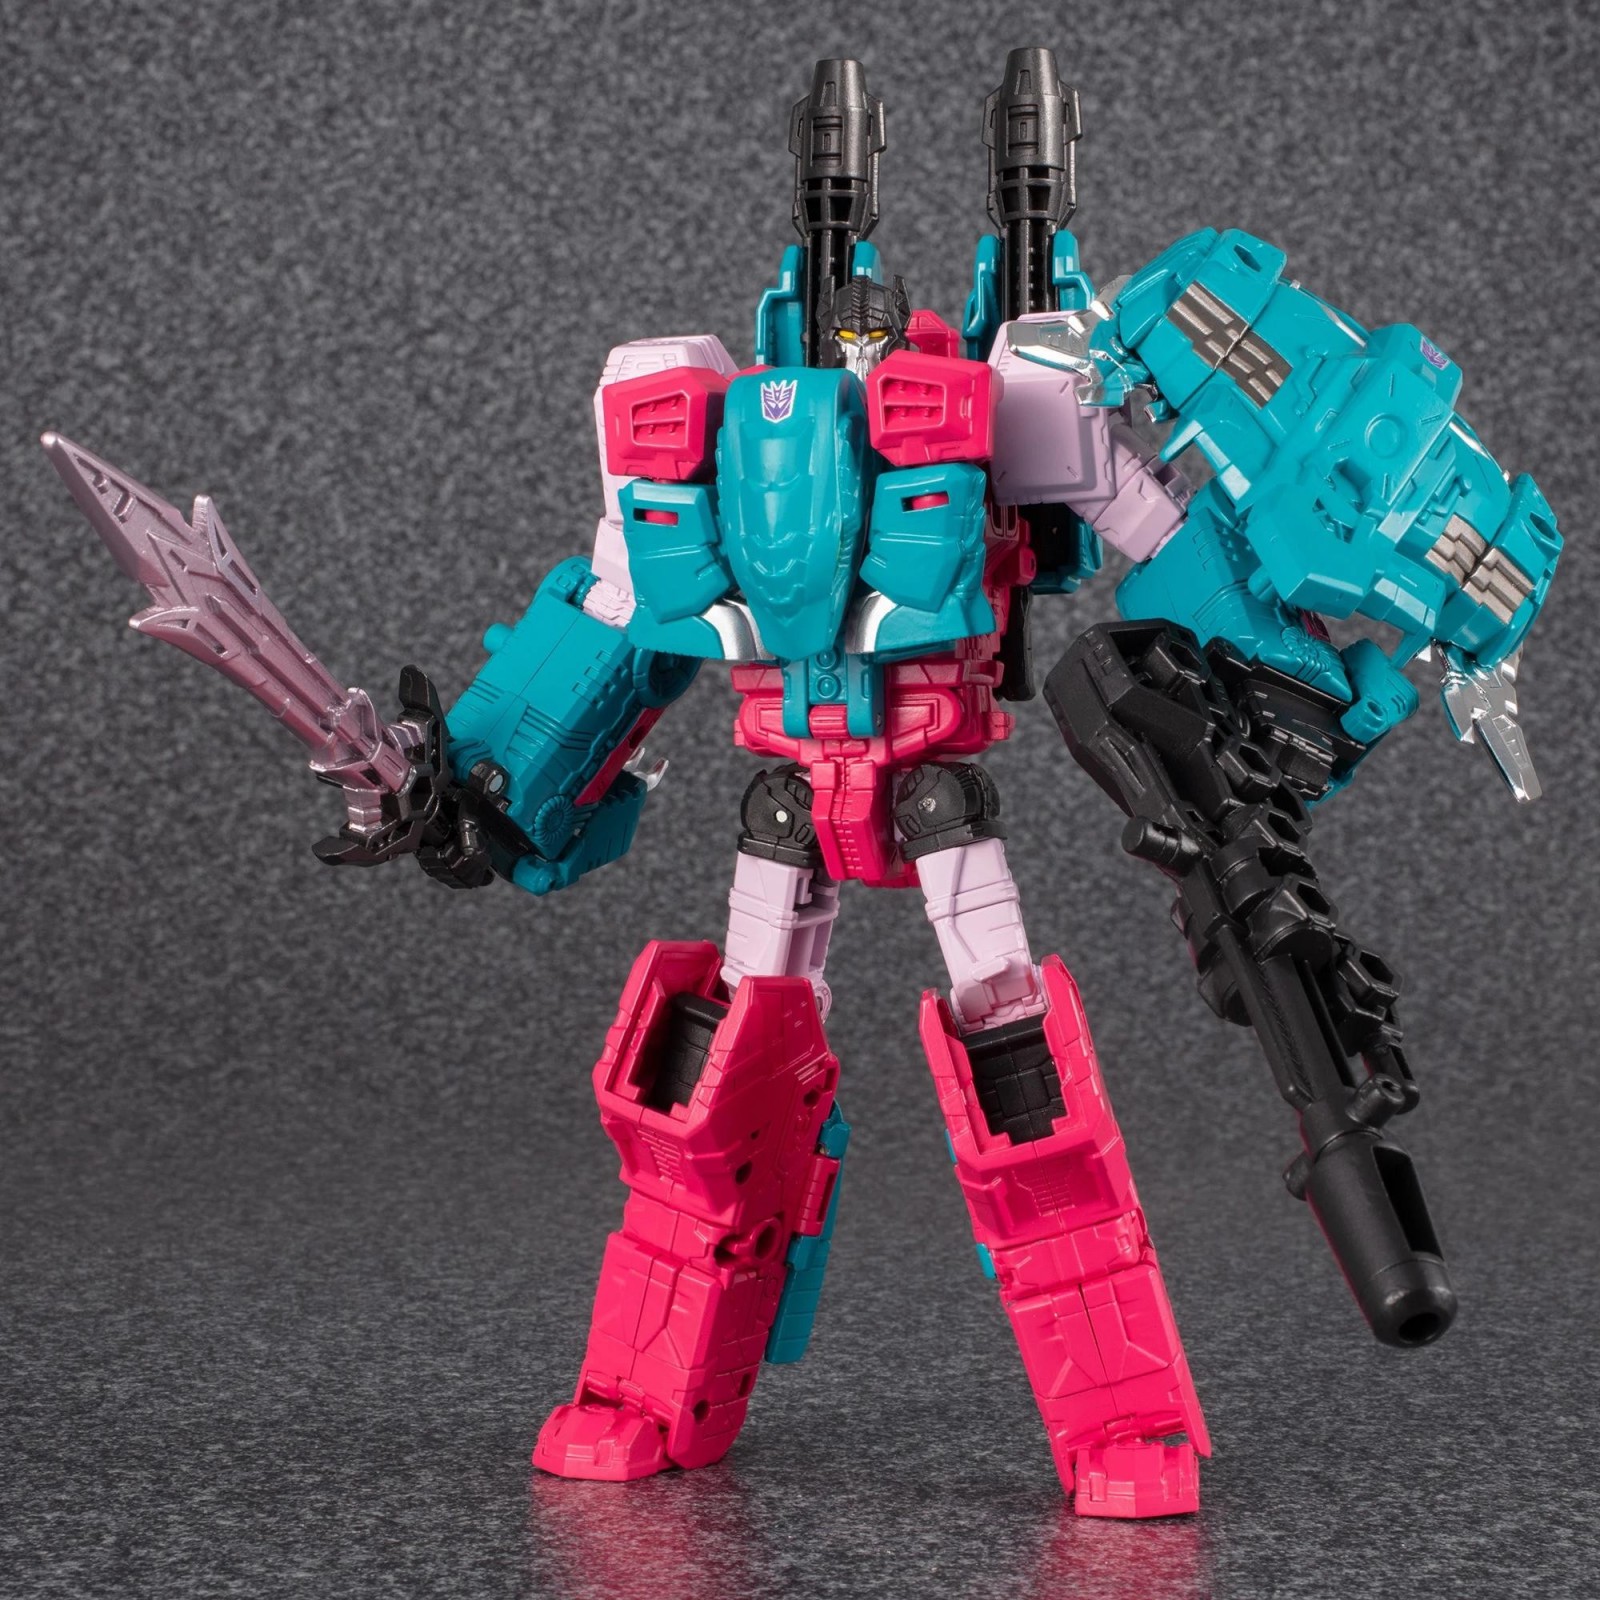 Transformers News: Transformers Generations Selects Turtler and Gulf Shipping from Hasbro Pulse